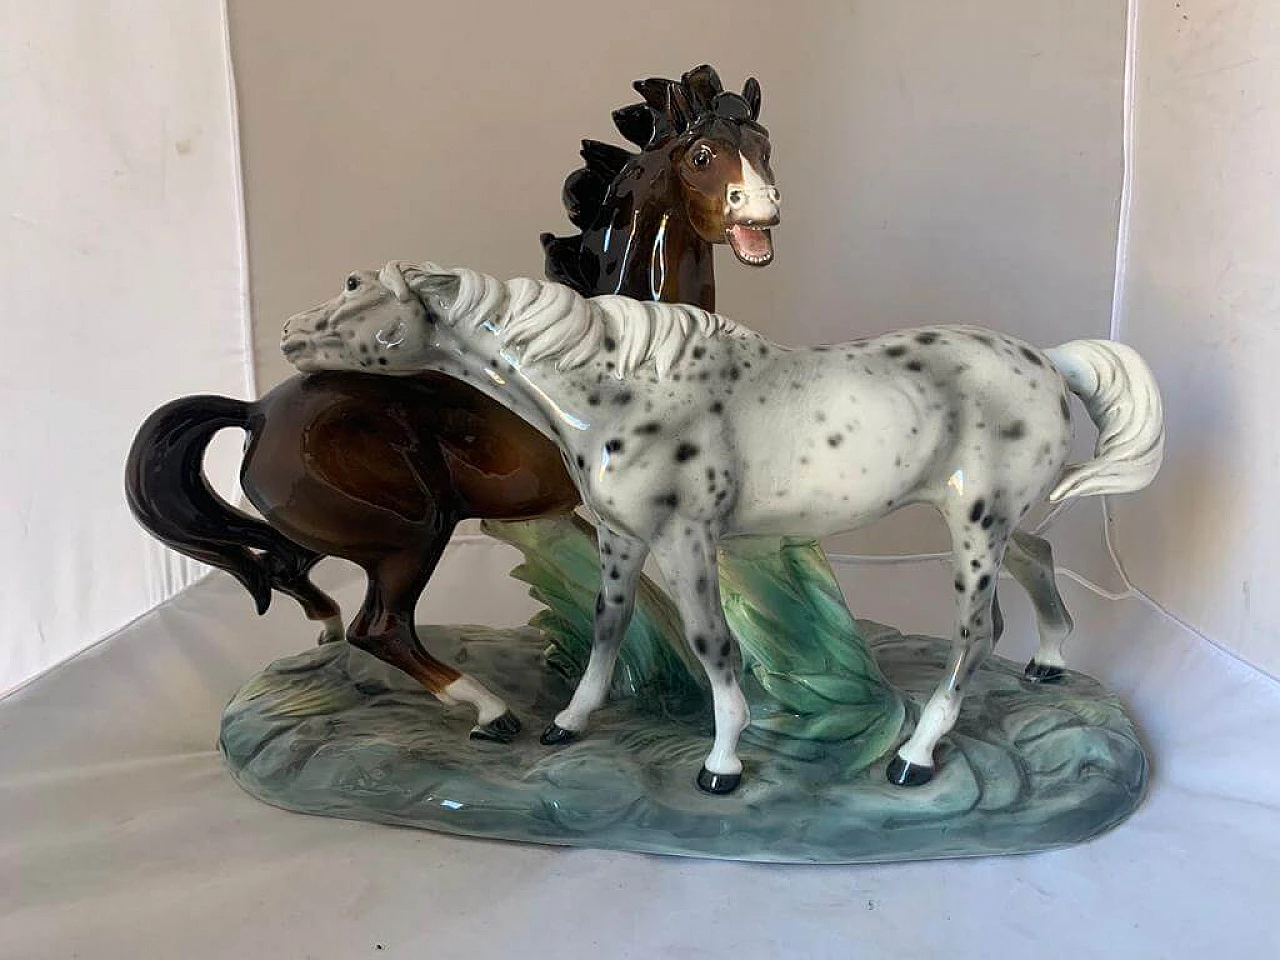 Ceramic sculpture of 2 horses by Ronzan, 1940s 1176517